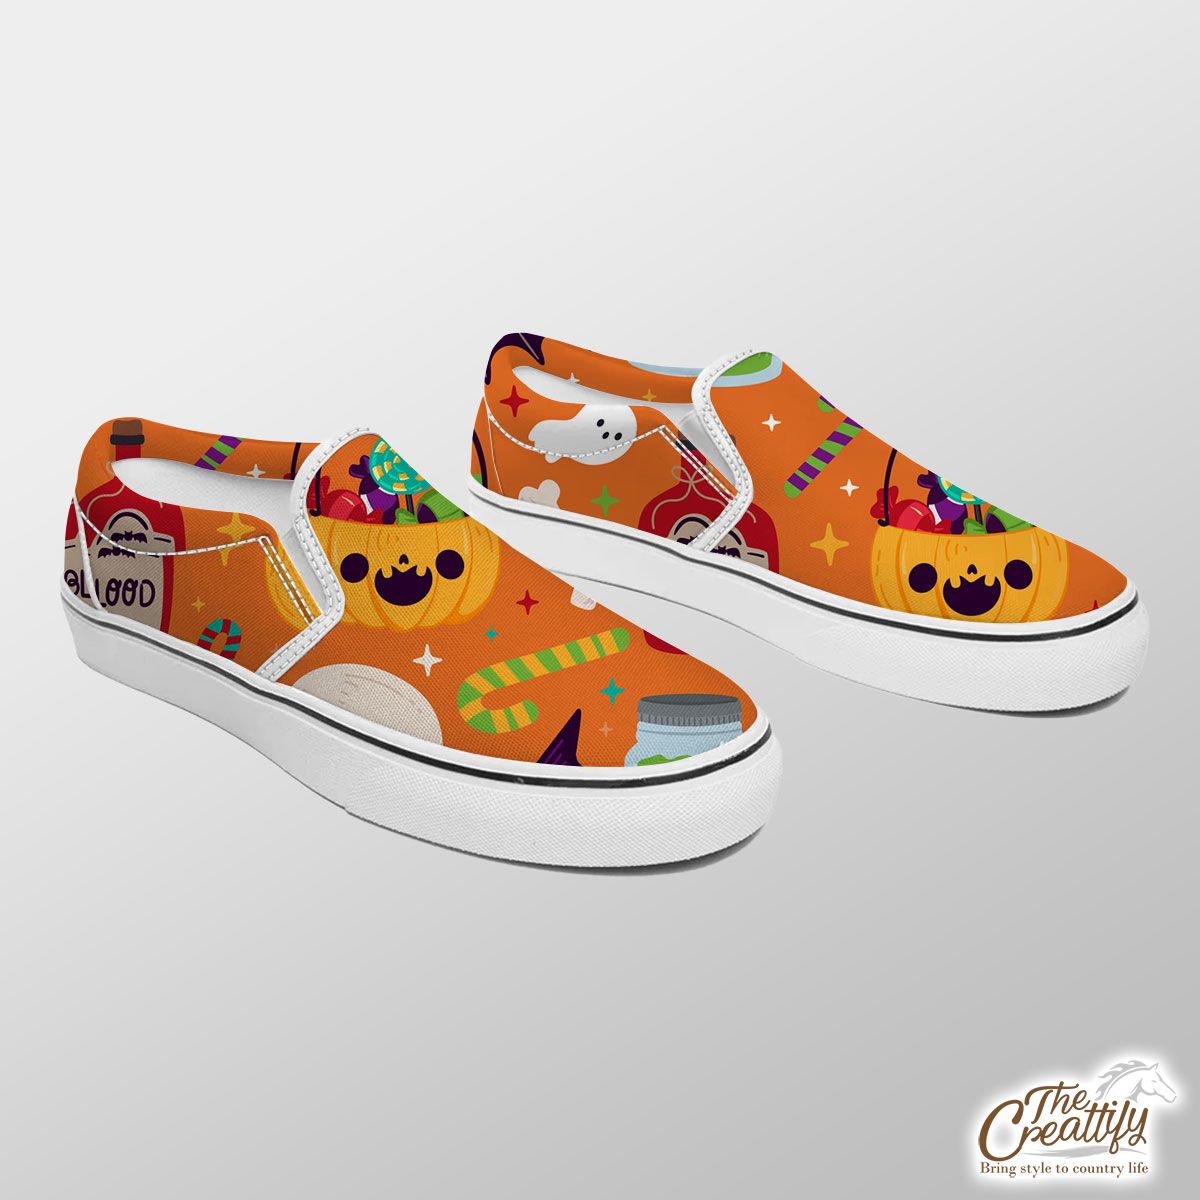 Cute Pumpkin, Jack O Lantern Full of Candy, Witch Potions and Bat Orange Halloween Slip On Sneakers